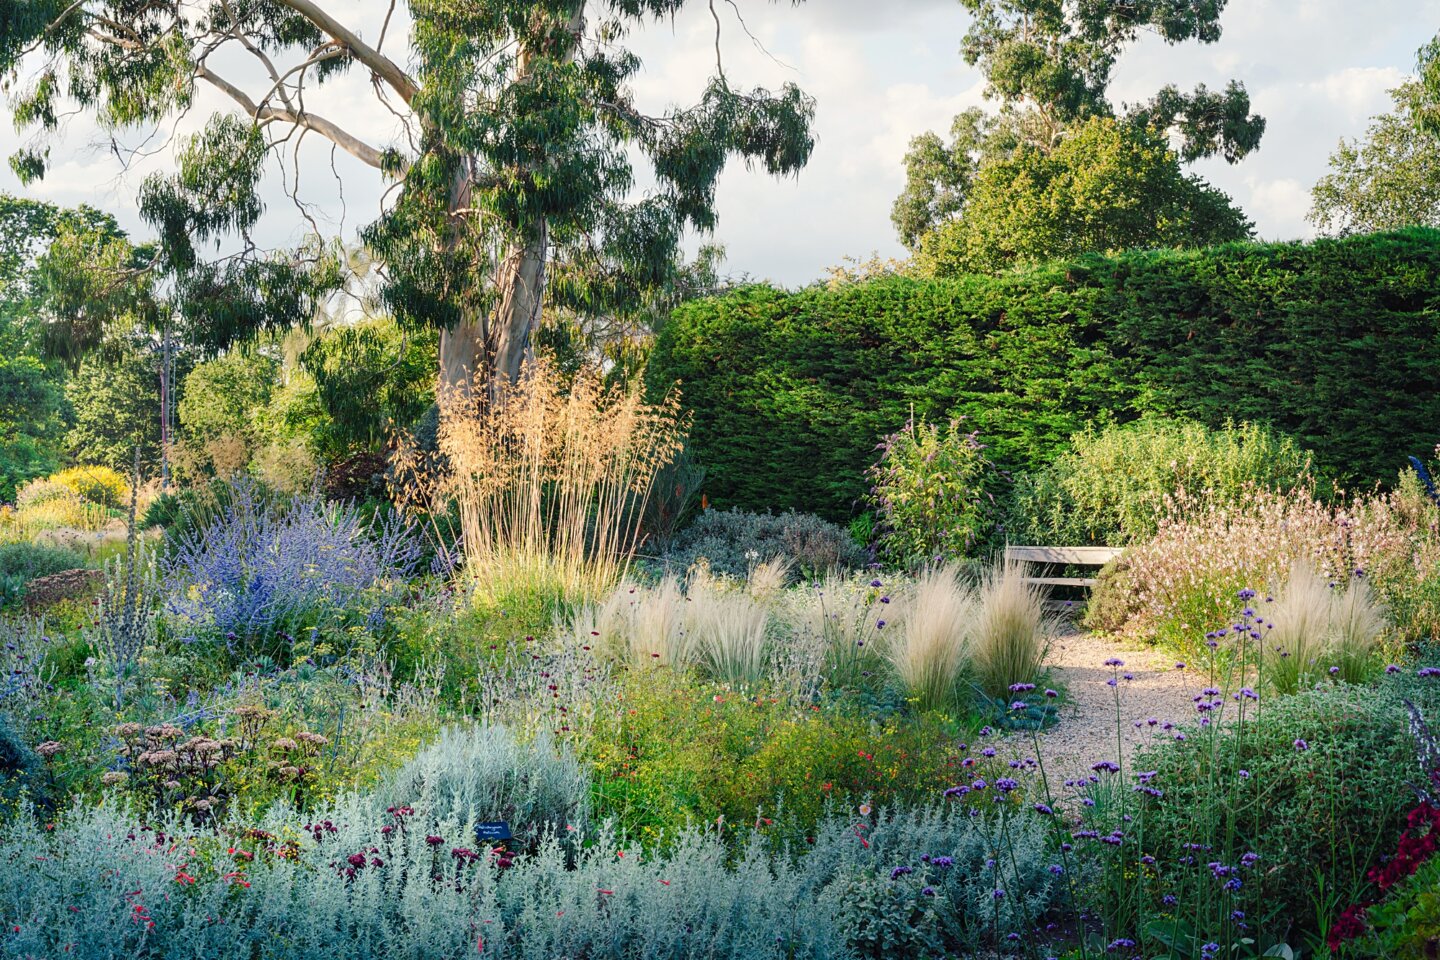 Beth Chatto's Gravel Garden in midsummer with sunlight on grasses in silver, gold and blue